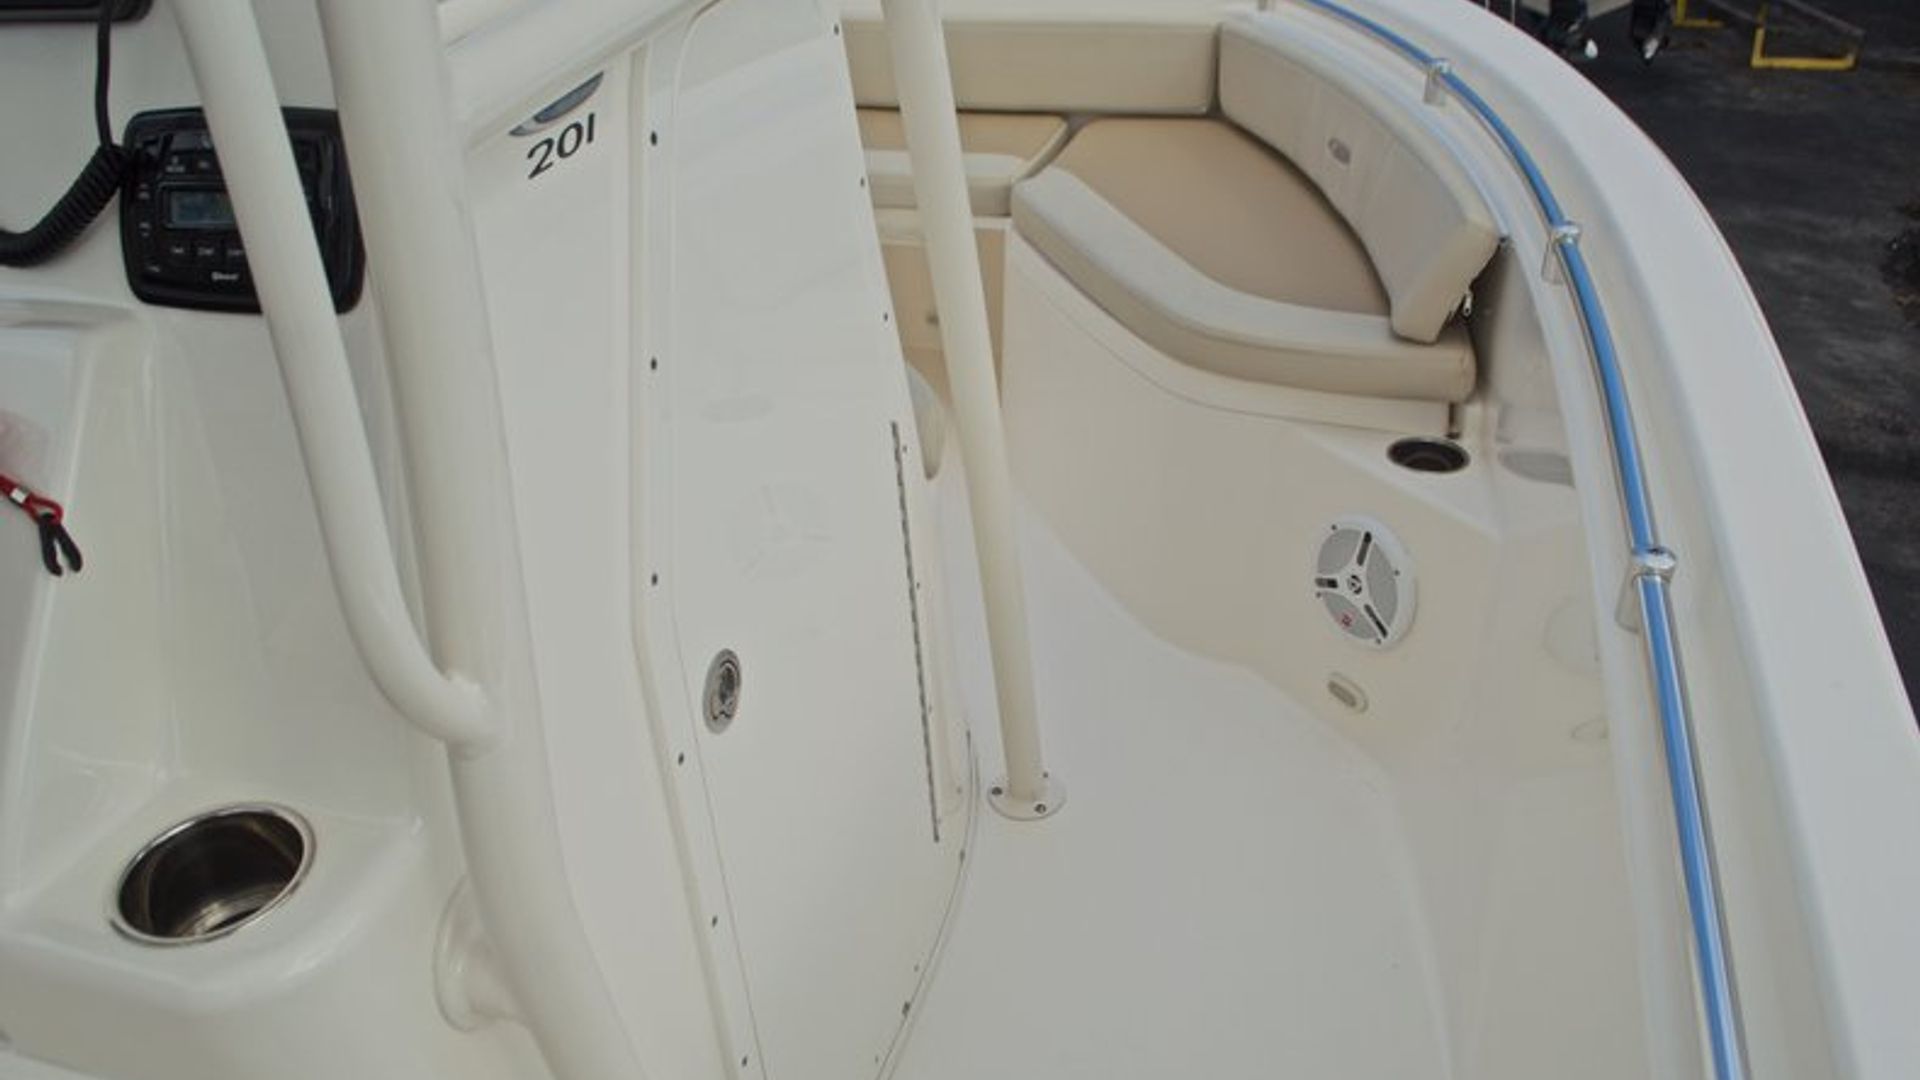 Used 2015 Cobia 201 Center Console #T004 image 36